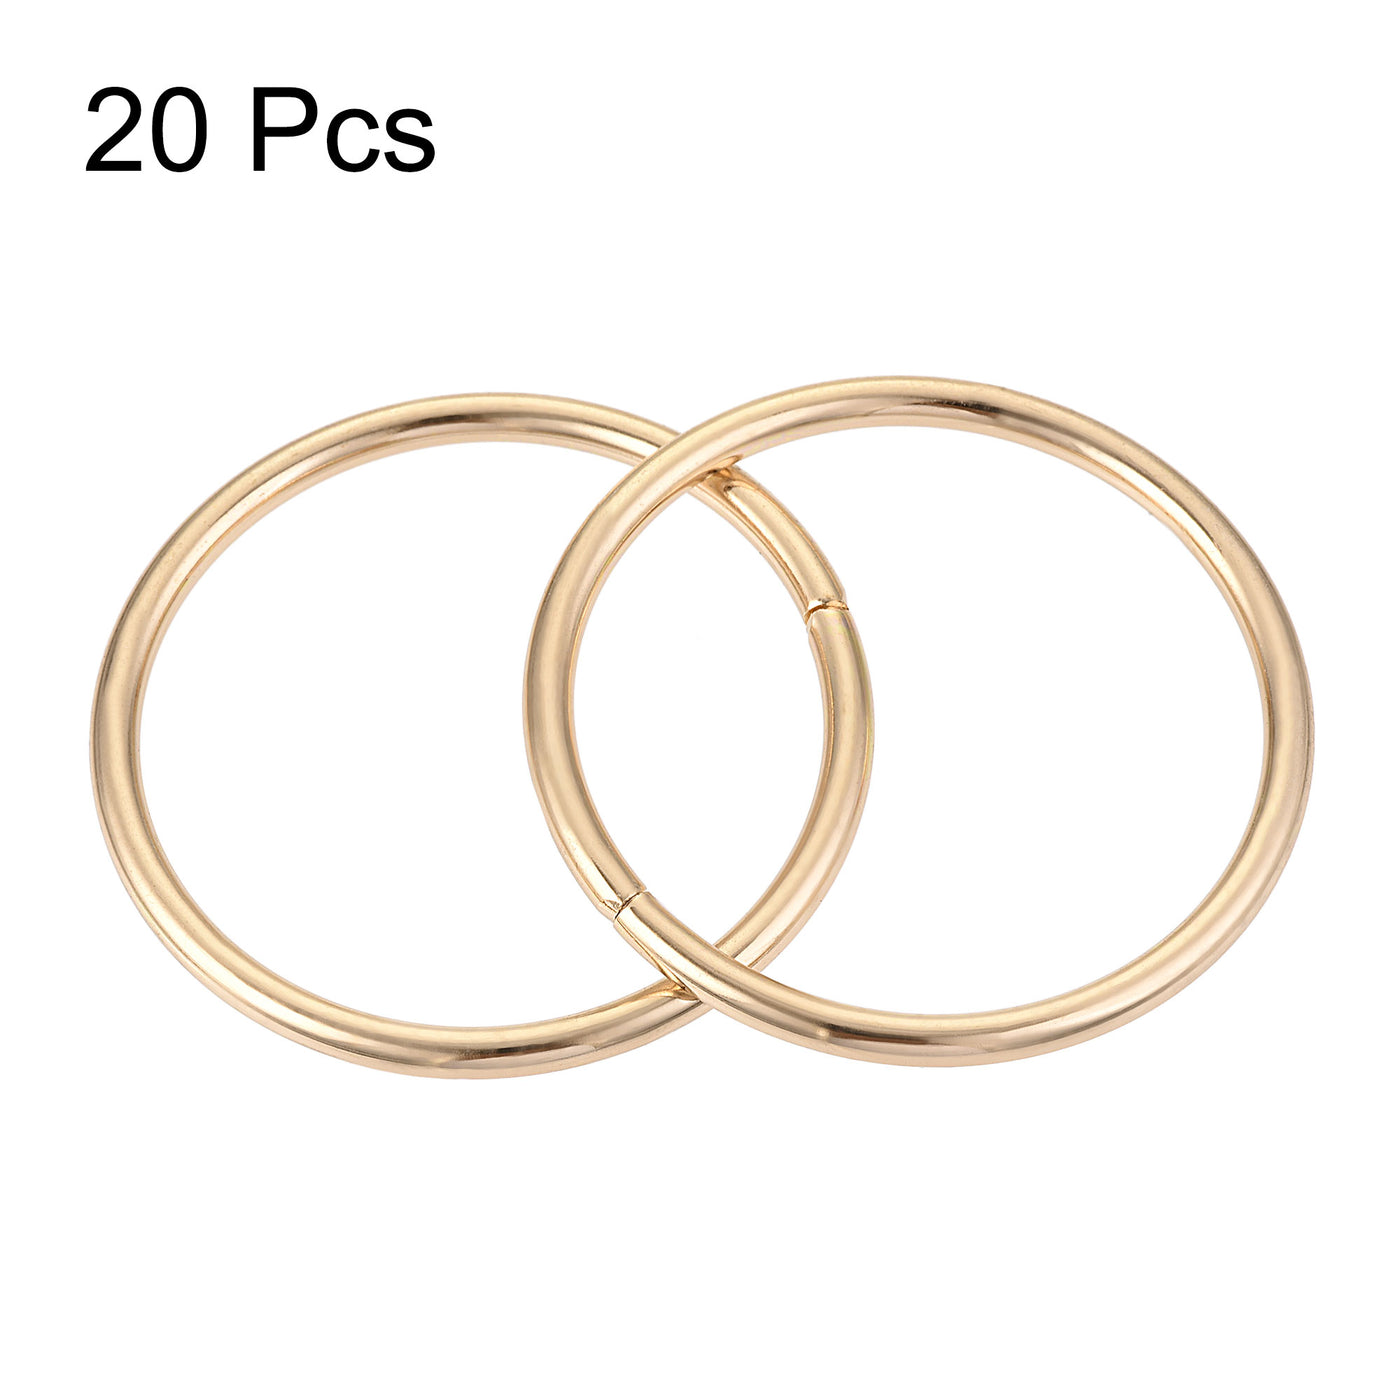 uxcell Uxcell 40mm Metal O Rings Non-Welded for Straps Bags Belts DIY Gold Tone 20pcs